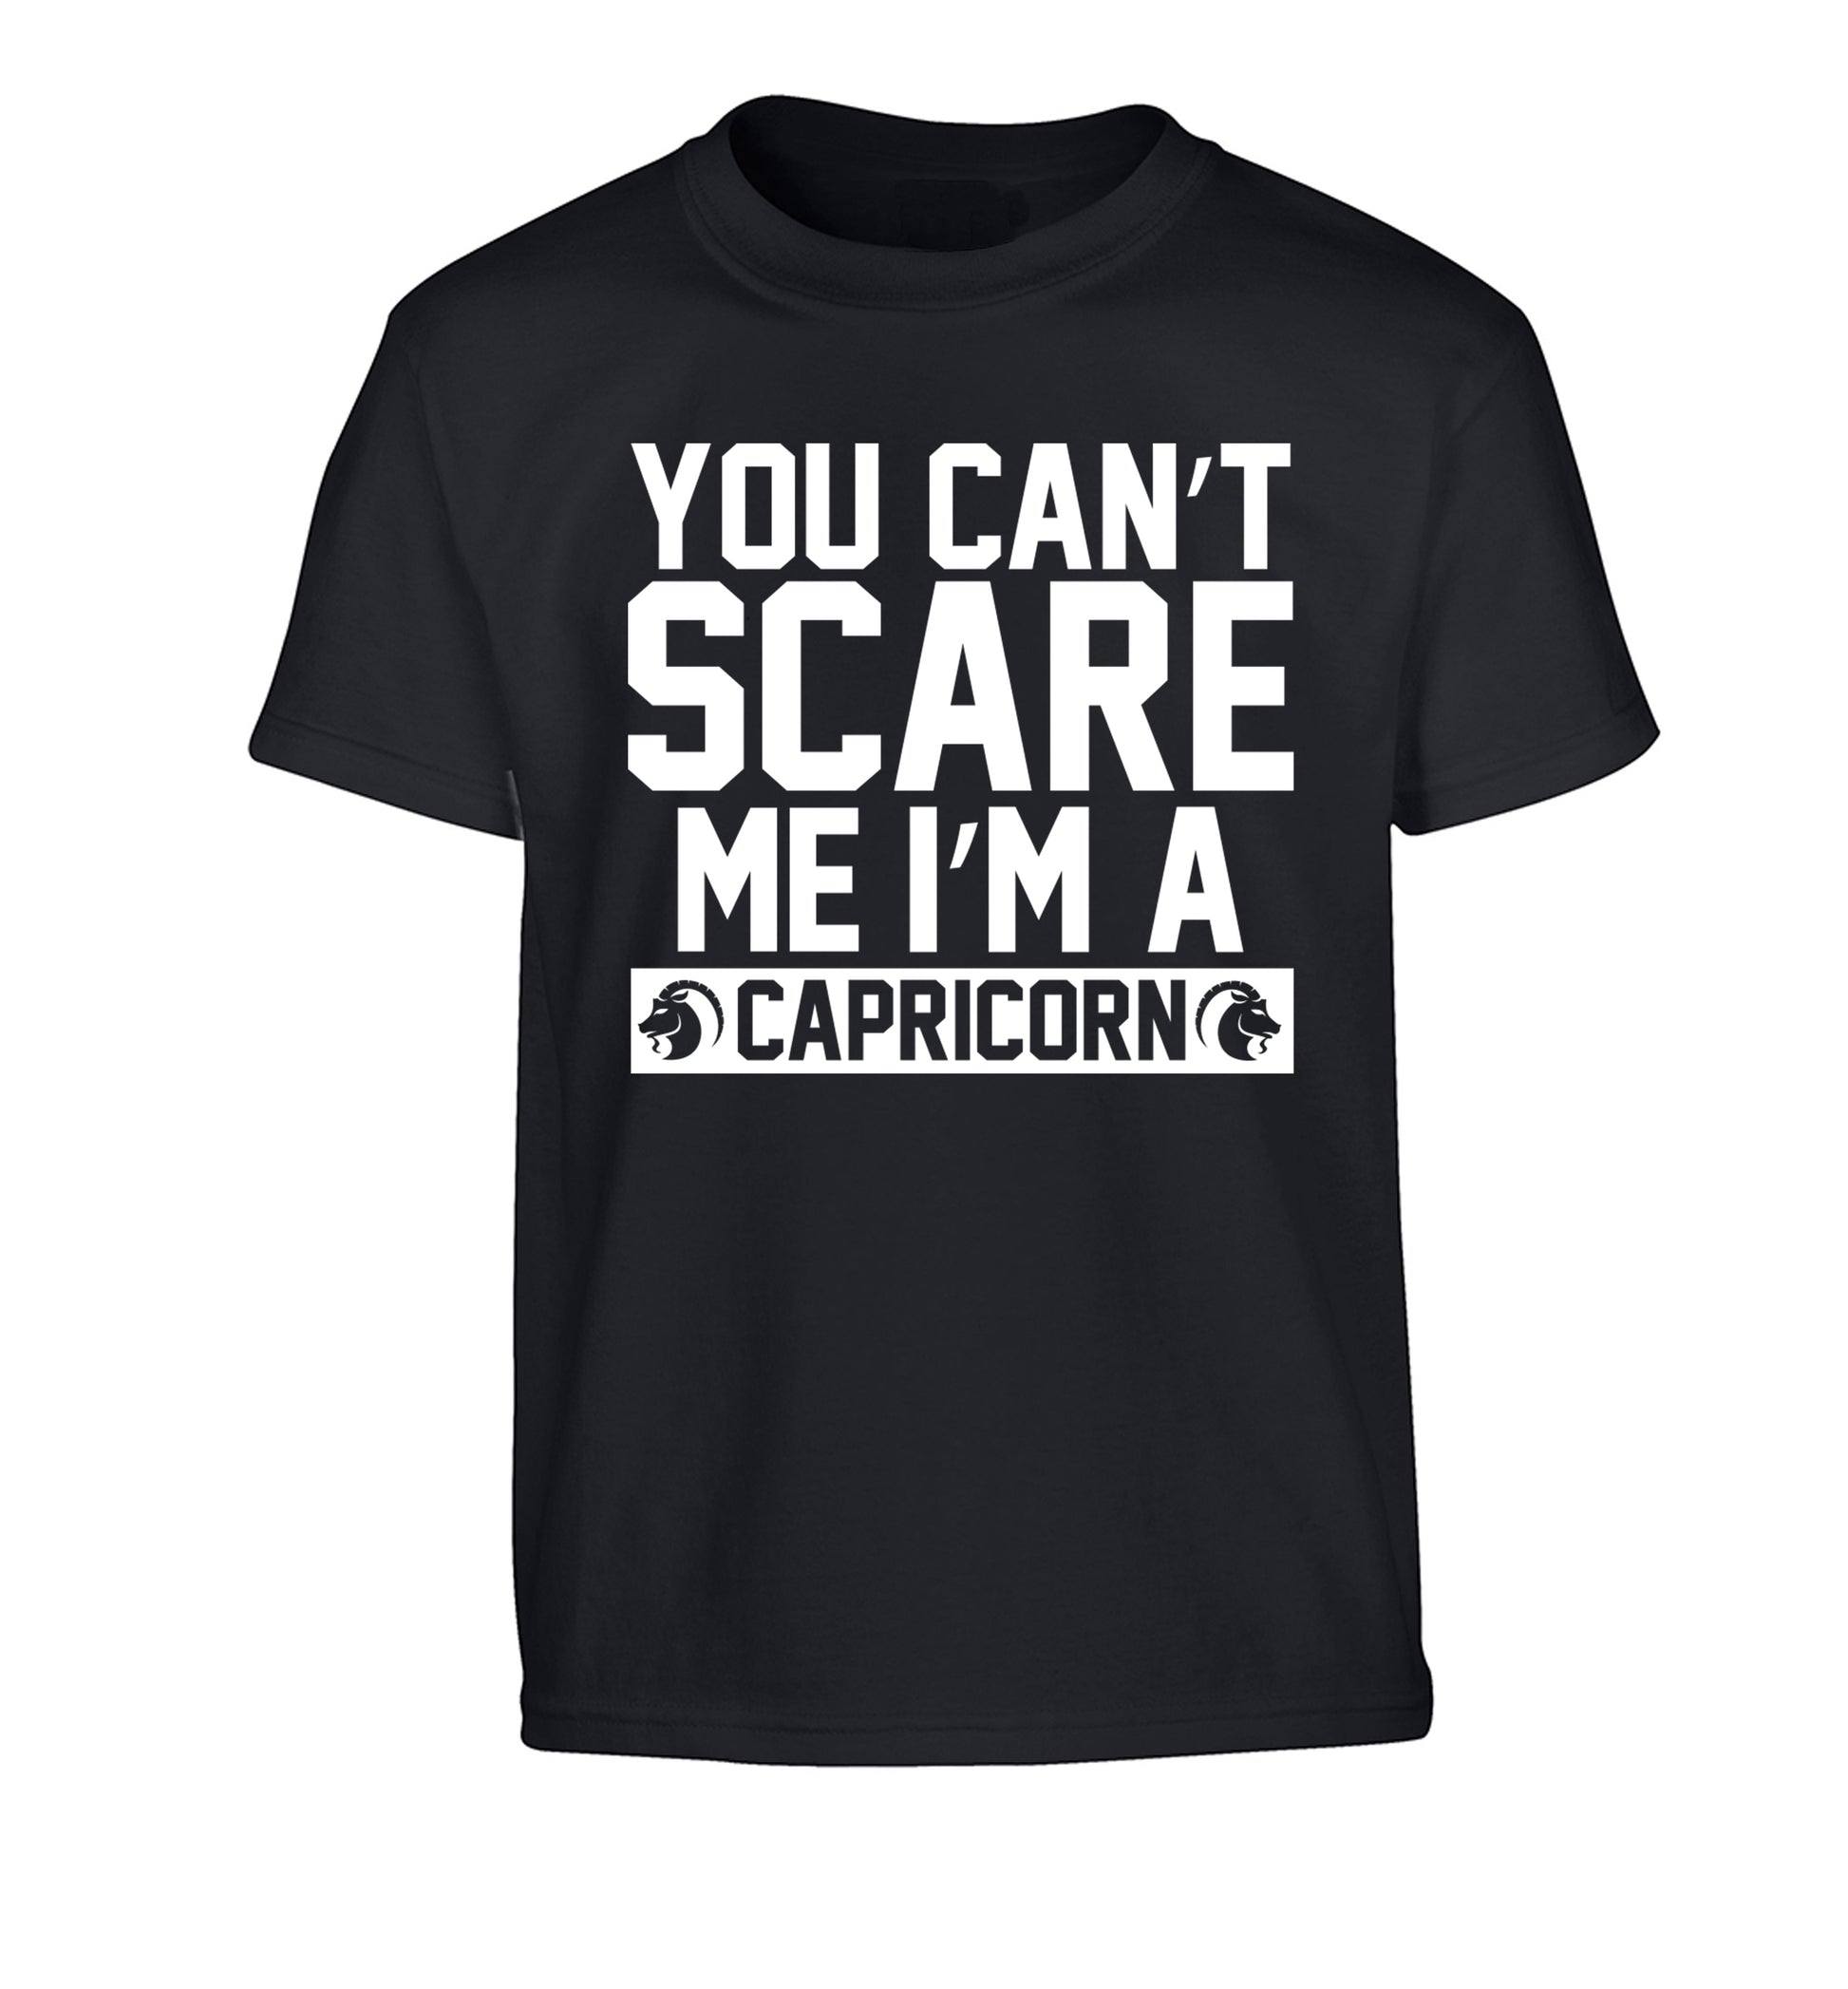 You can't scare me I'm a capricorn Children's black Tshirt 12-13 Years